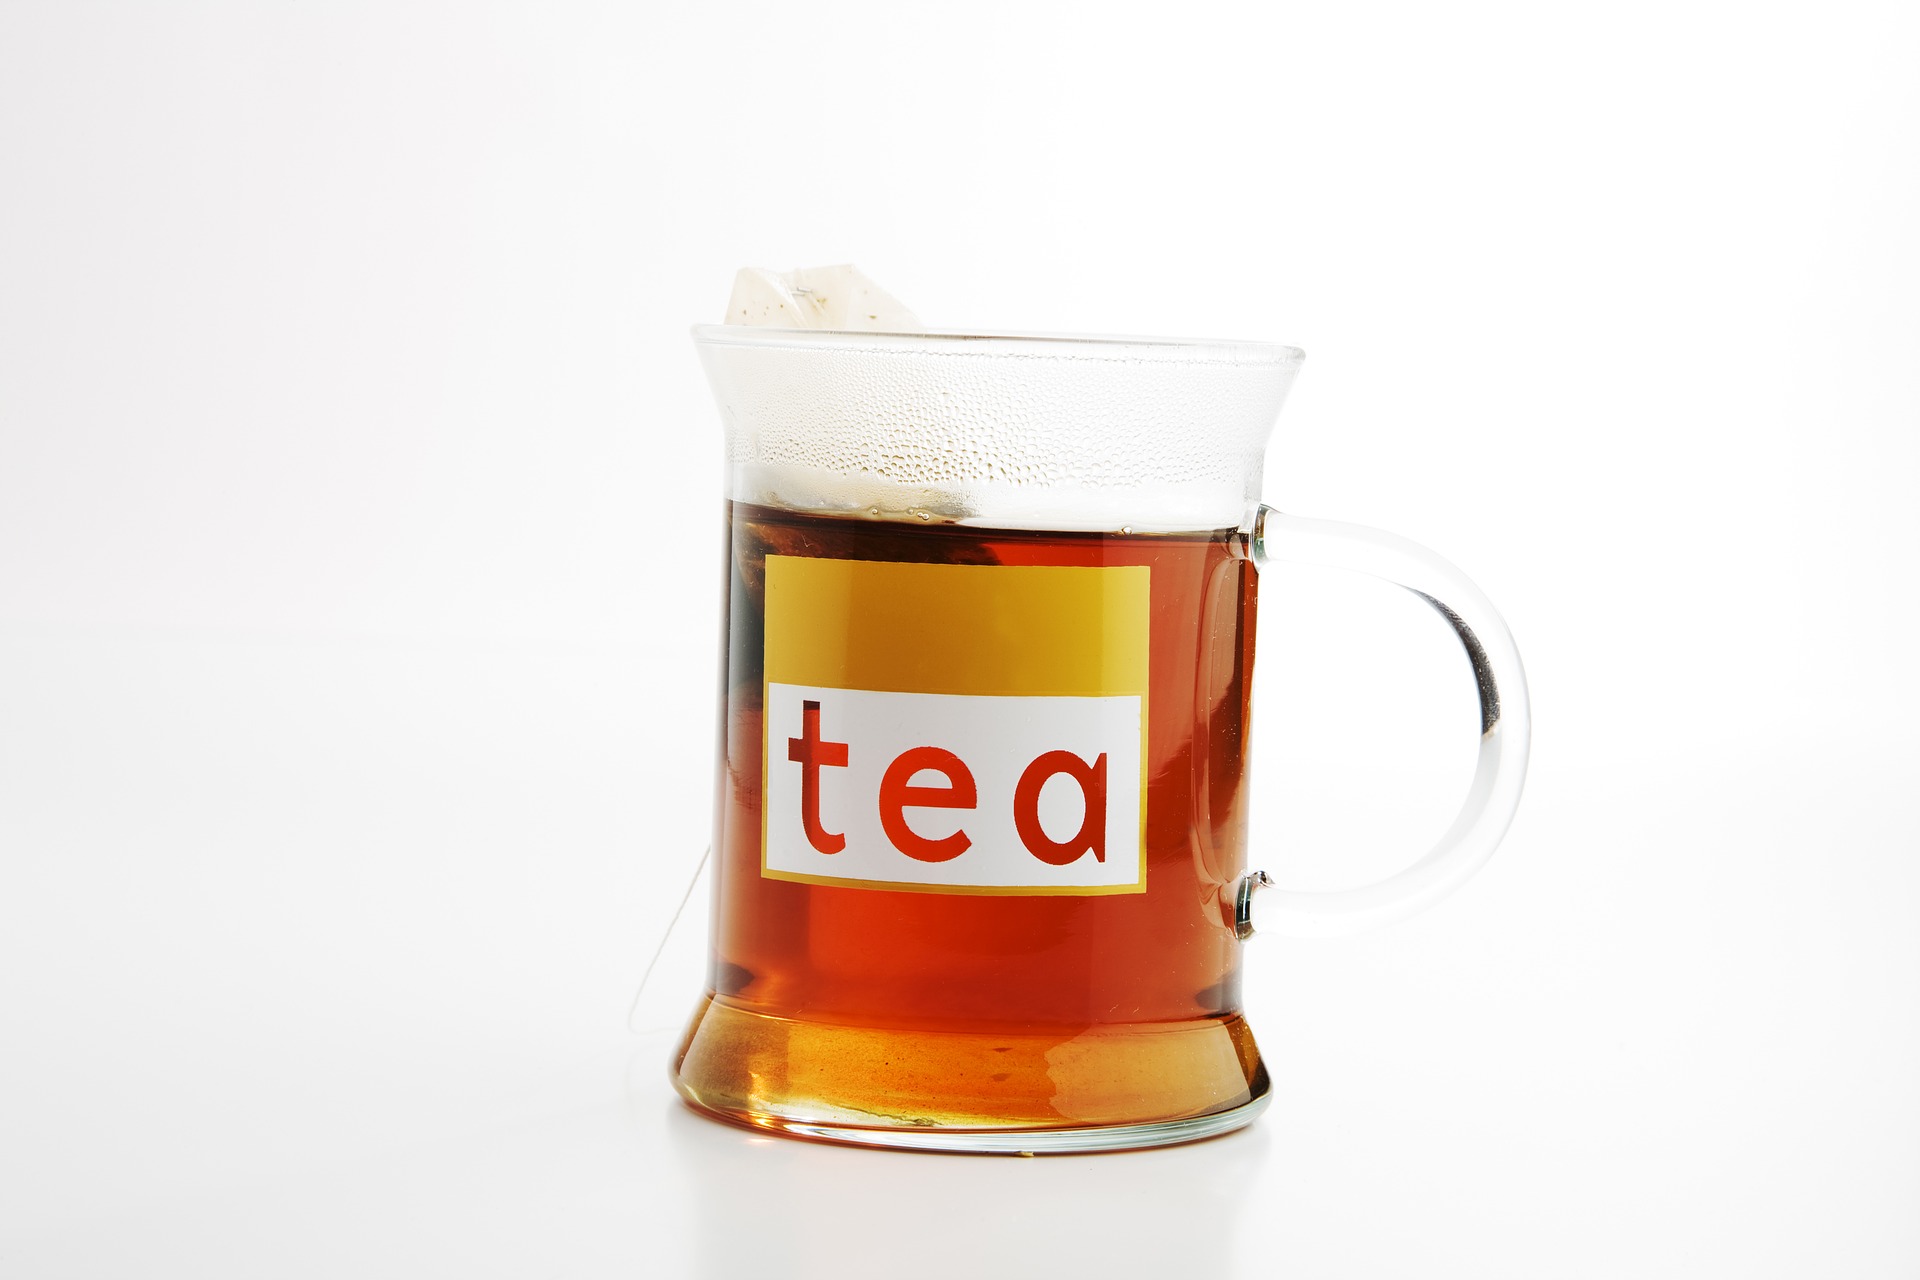 new-ways-for-used-tea-leaves-and-tea-bags-afternoon-tea-4-two-food